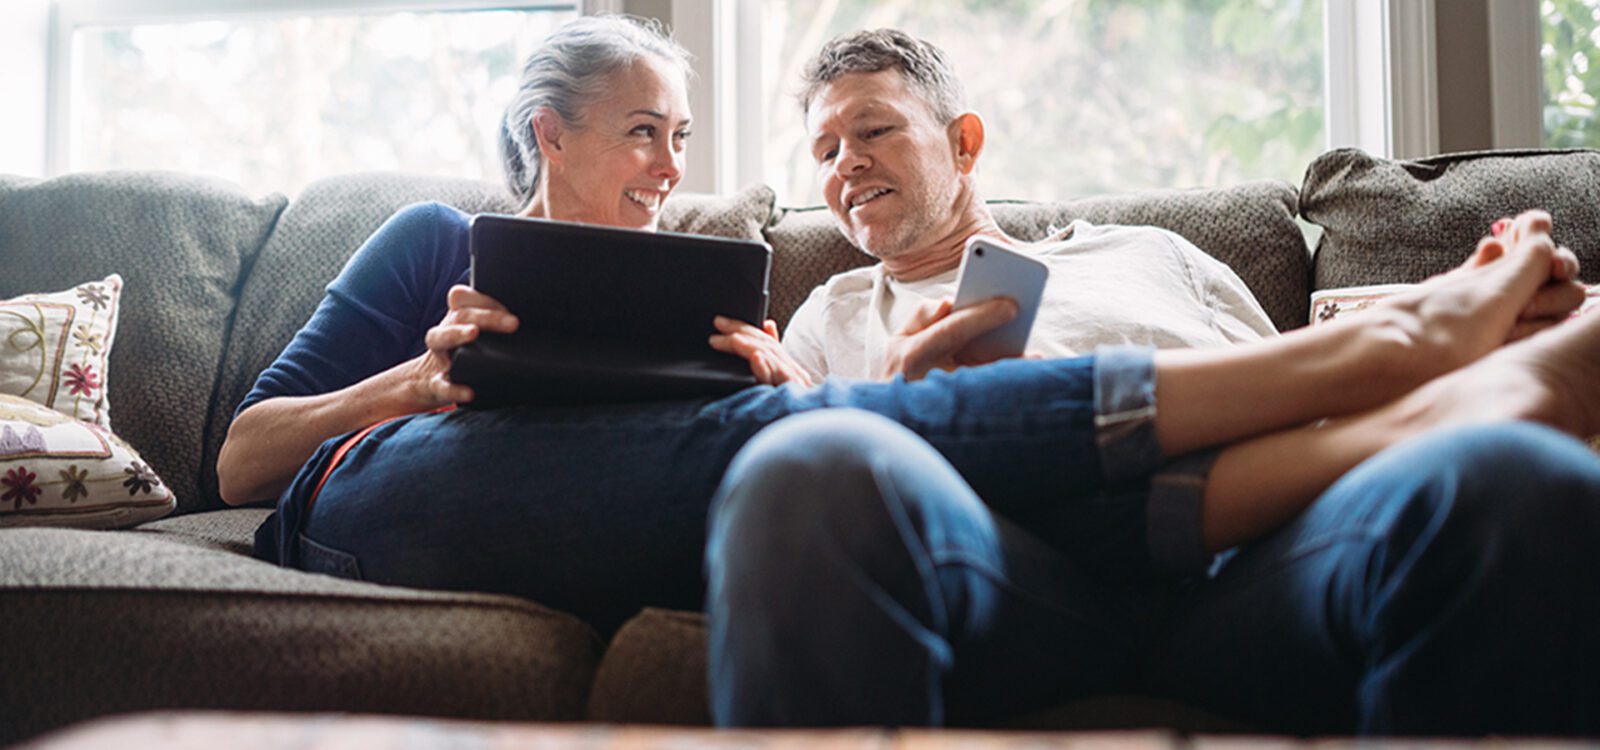 Man and woman are sitting down holding a tablet and phone.